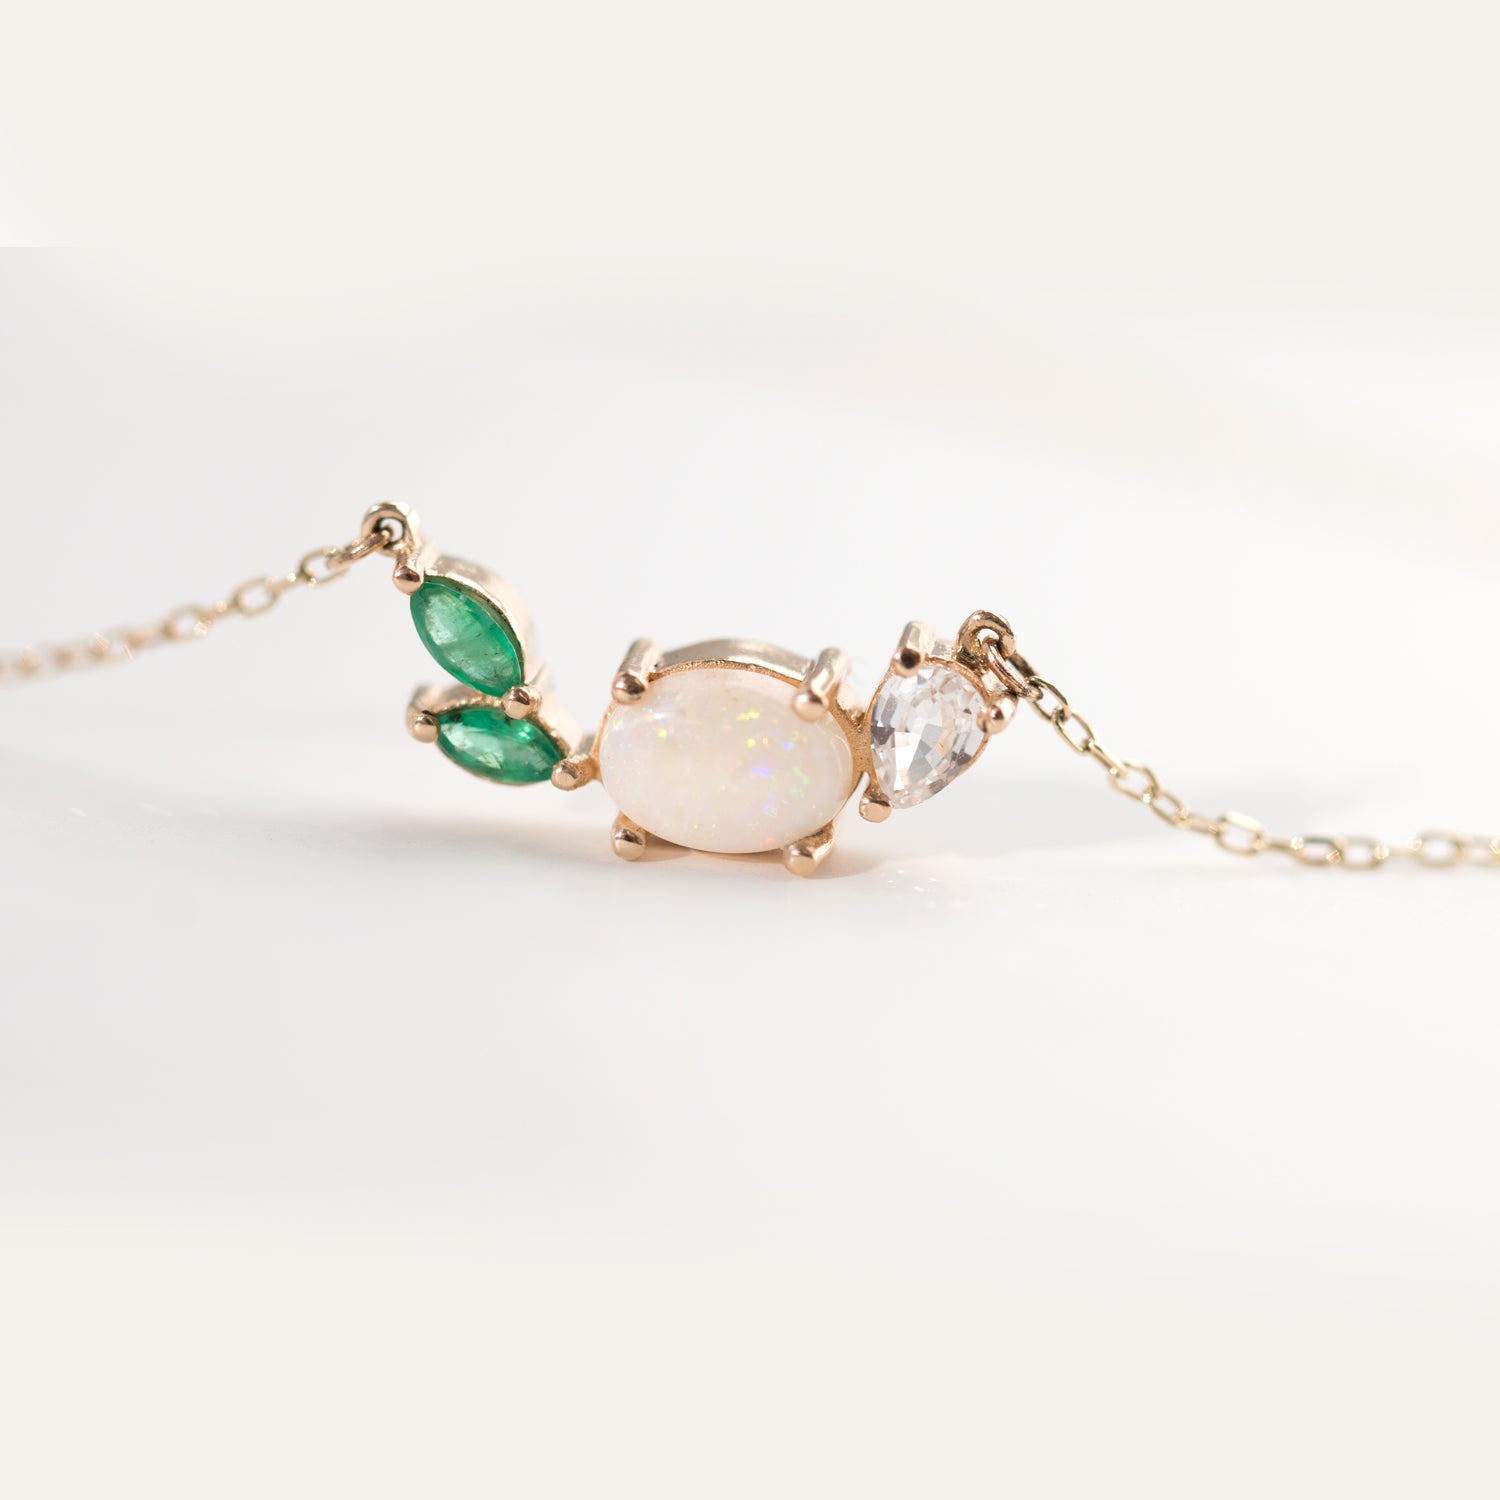 This beautiful, 14K gold-cast necklace is inspired by the tranquility of a lush evergreen. Adorned with a cluster of gorgeous gemstones, including an Australian opal and two emeralds, it's finished with a sparkly pear-cut lab diamond.